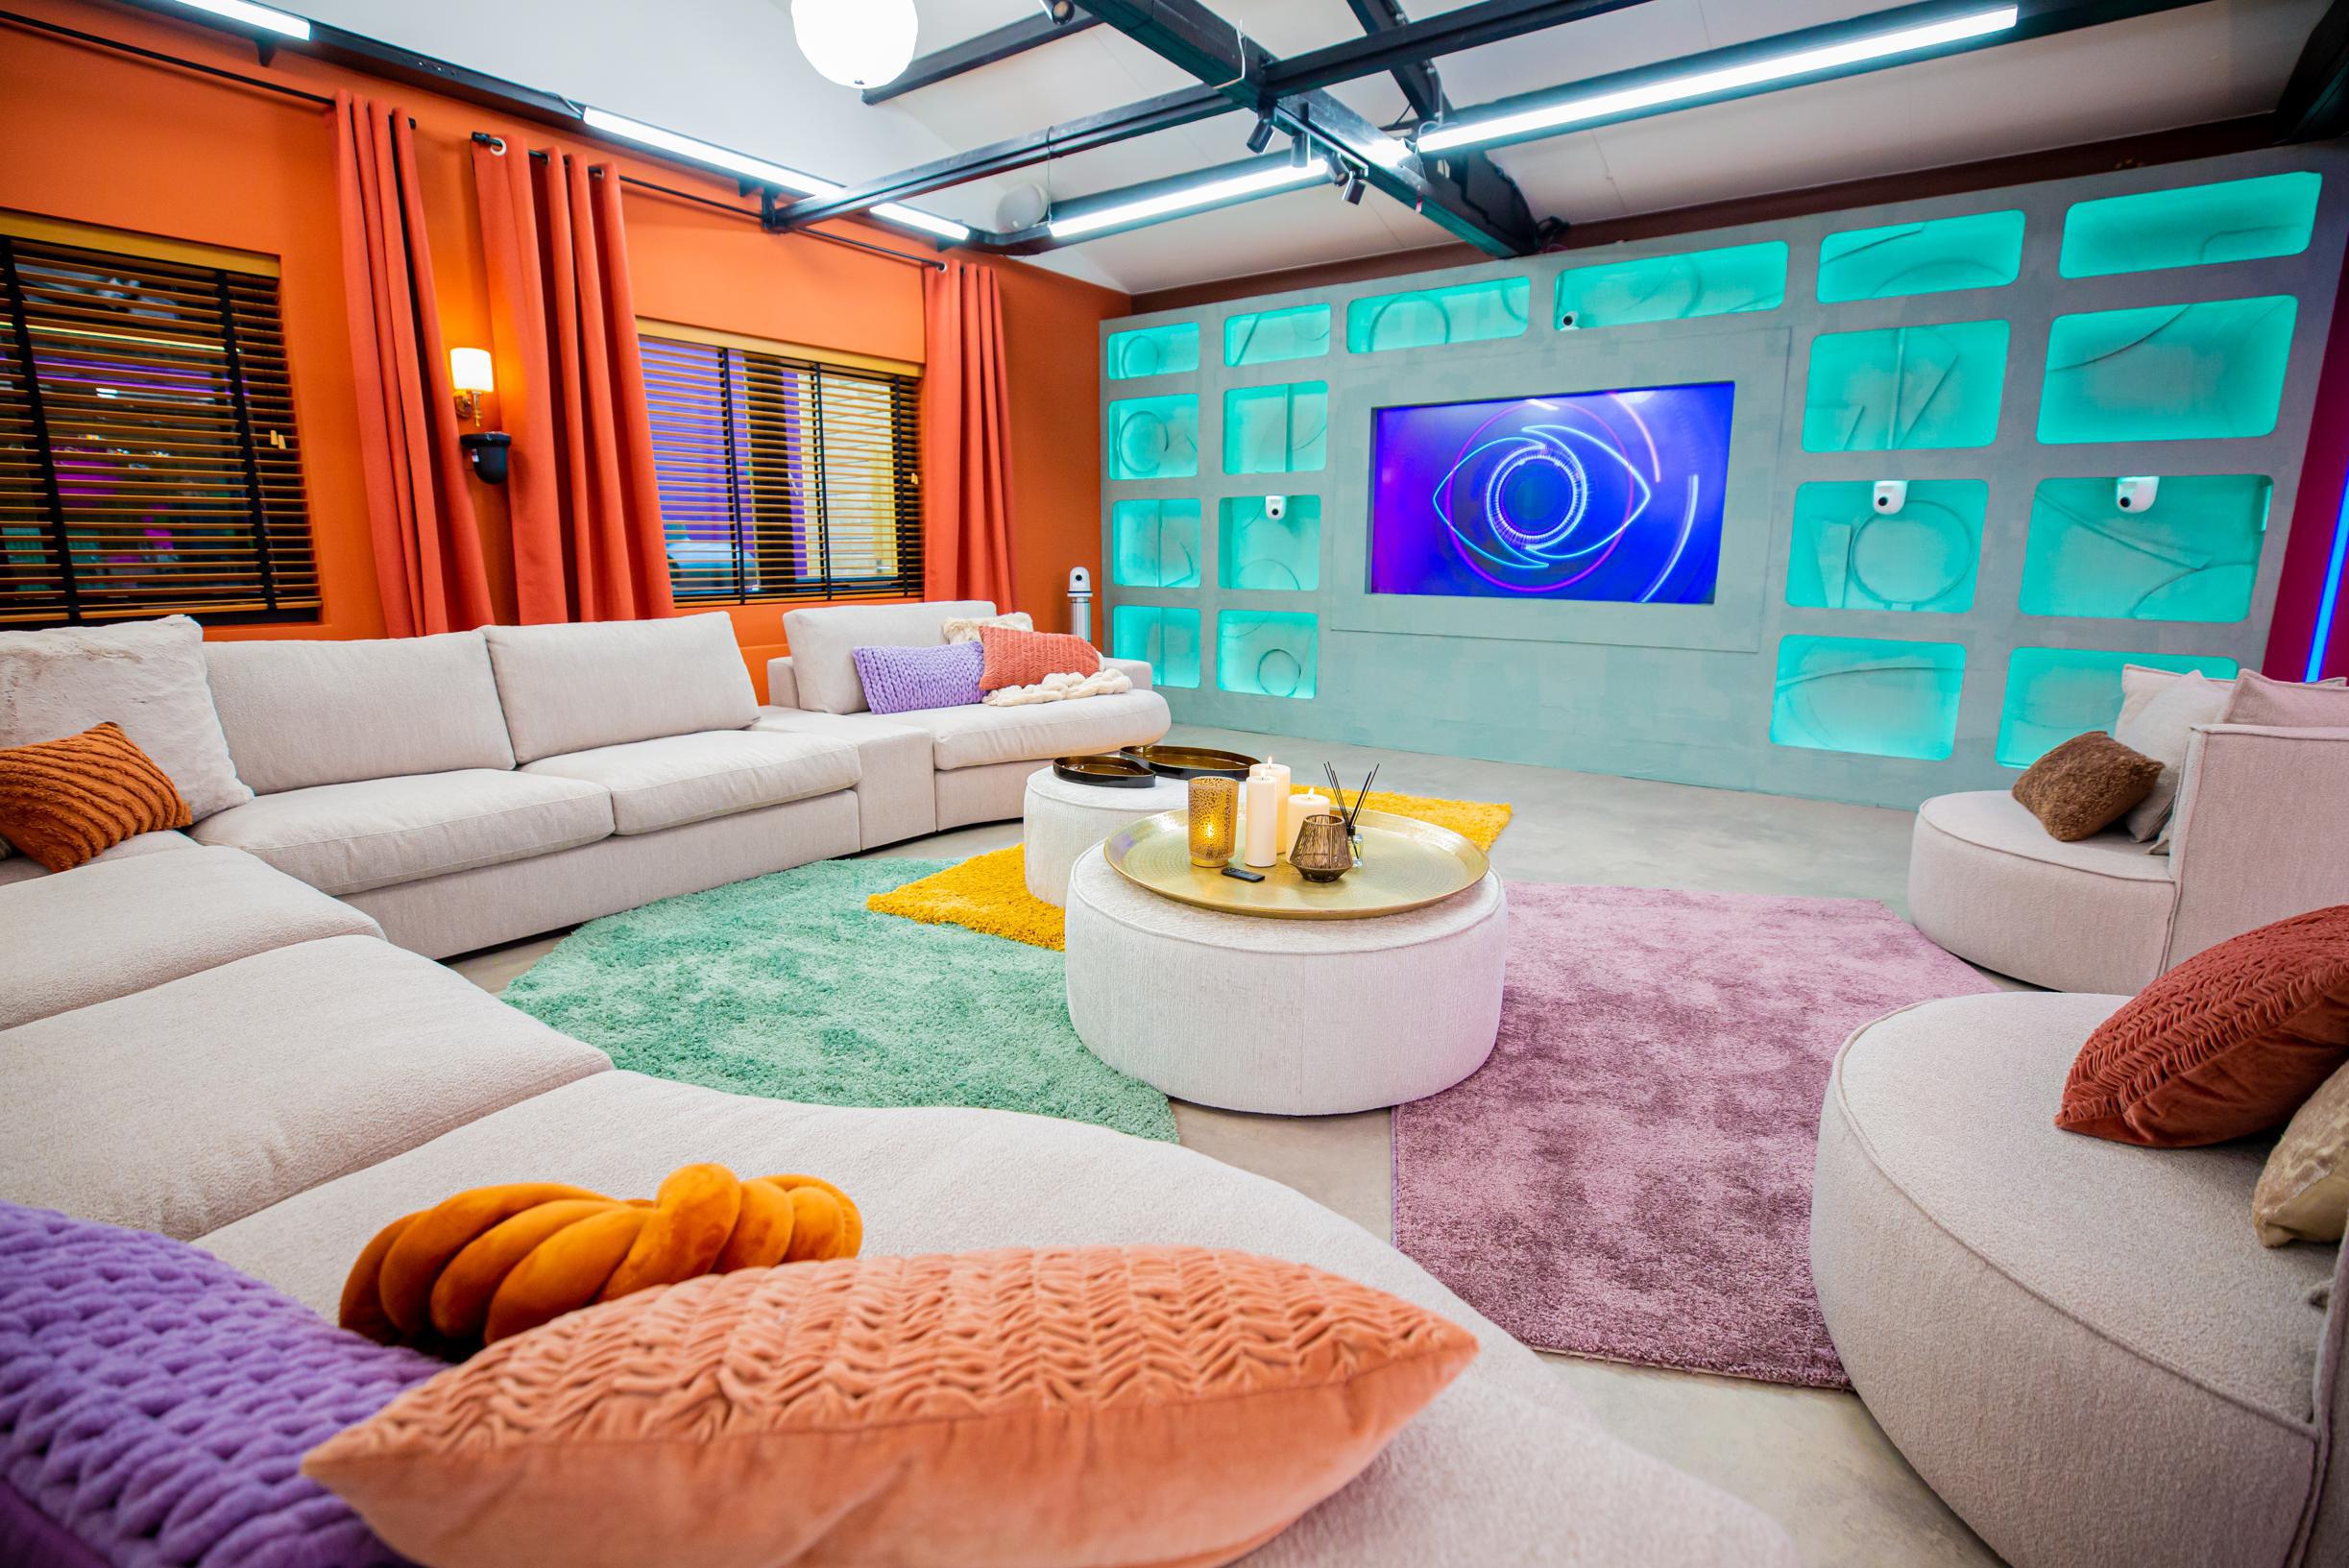 This is what the new “Big Brother” house looks like